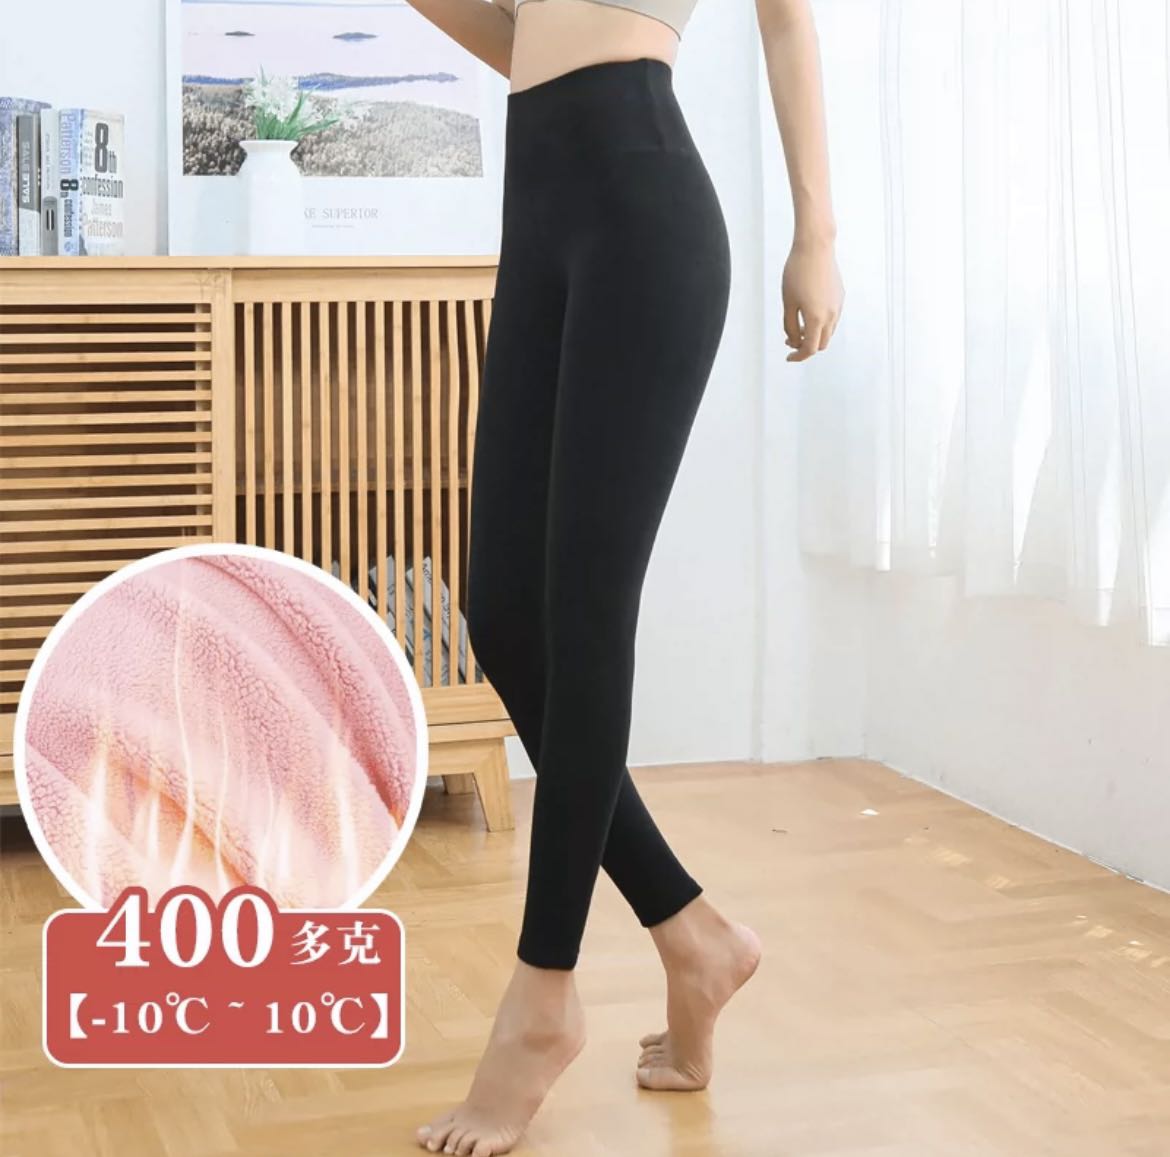 Thermal High Waisted Leggings with Fleece Lining in black, Women's Fashion,  Bottoms, Jeans & Leggings on Carousell